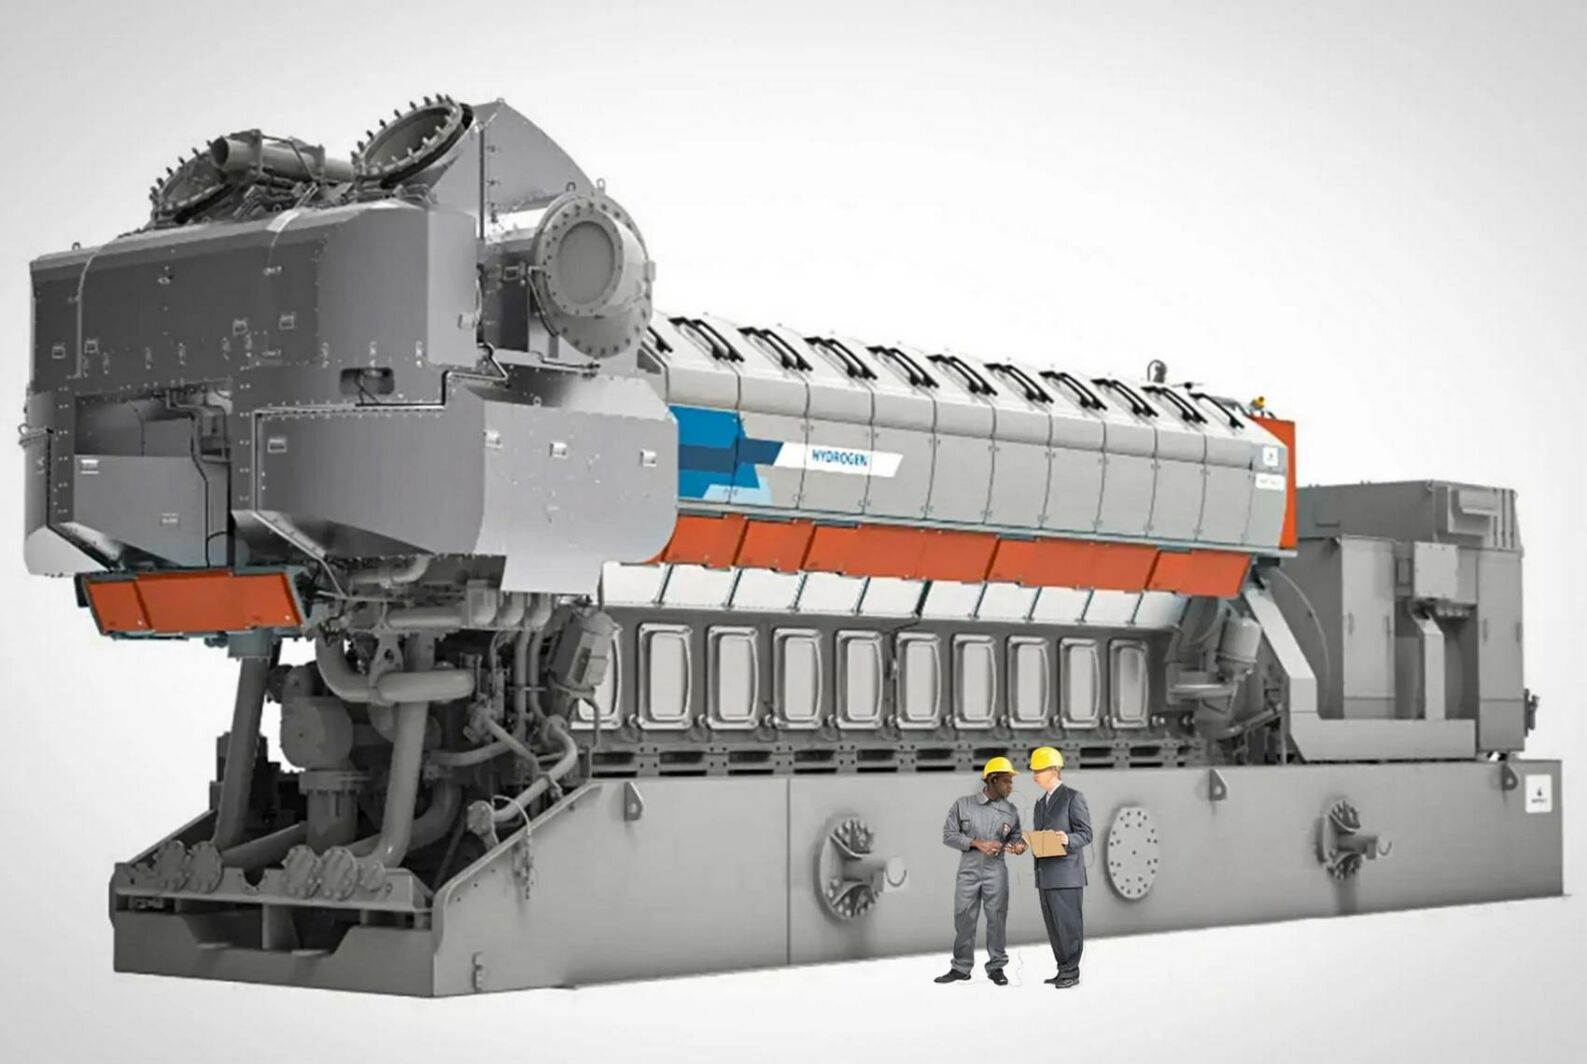 One of the World's Largest Engines become a Hydrogen Power Plant